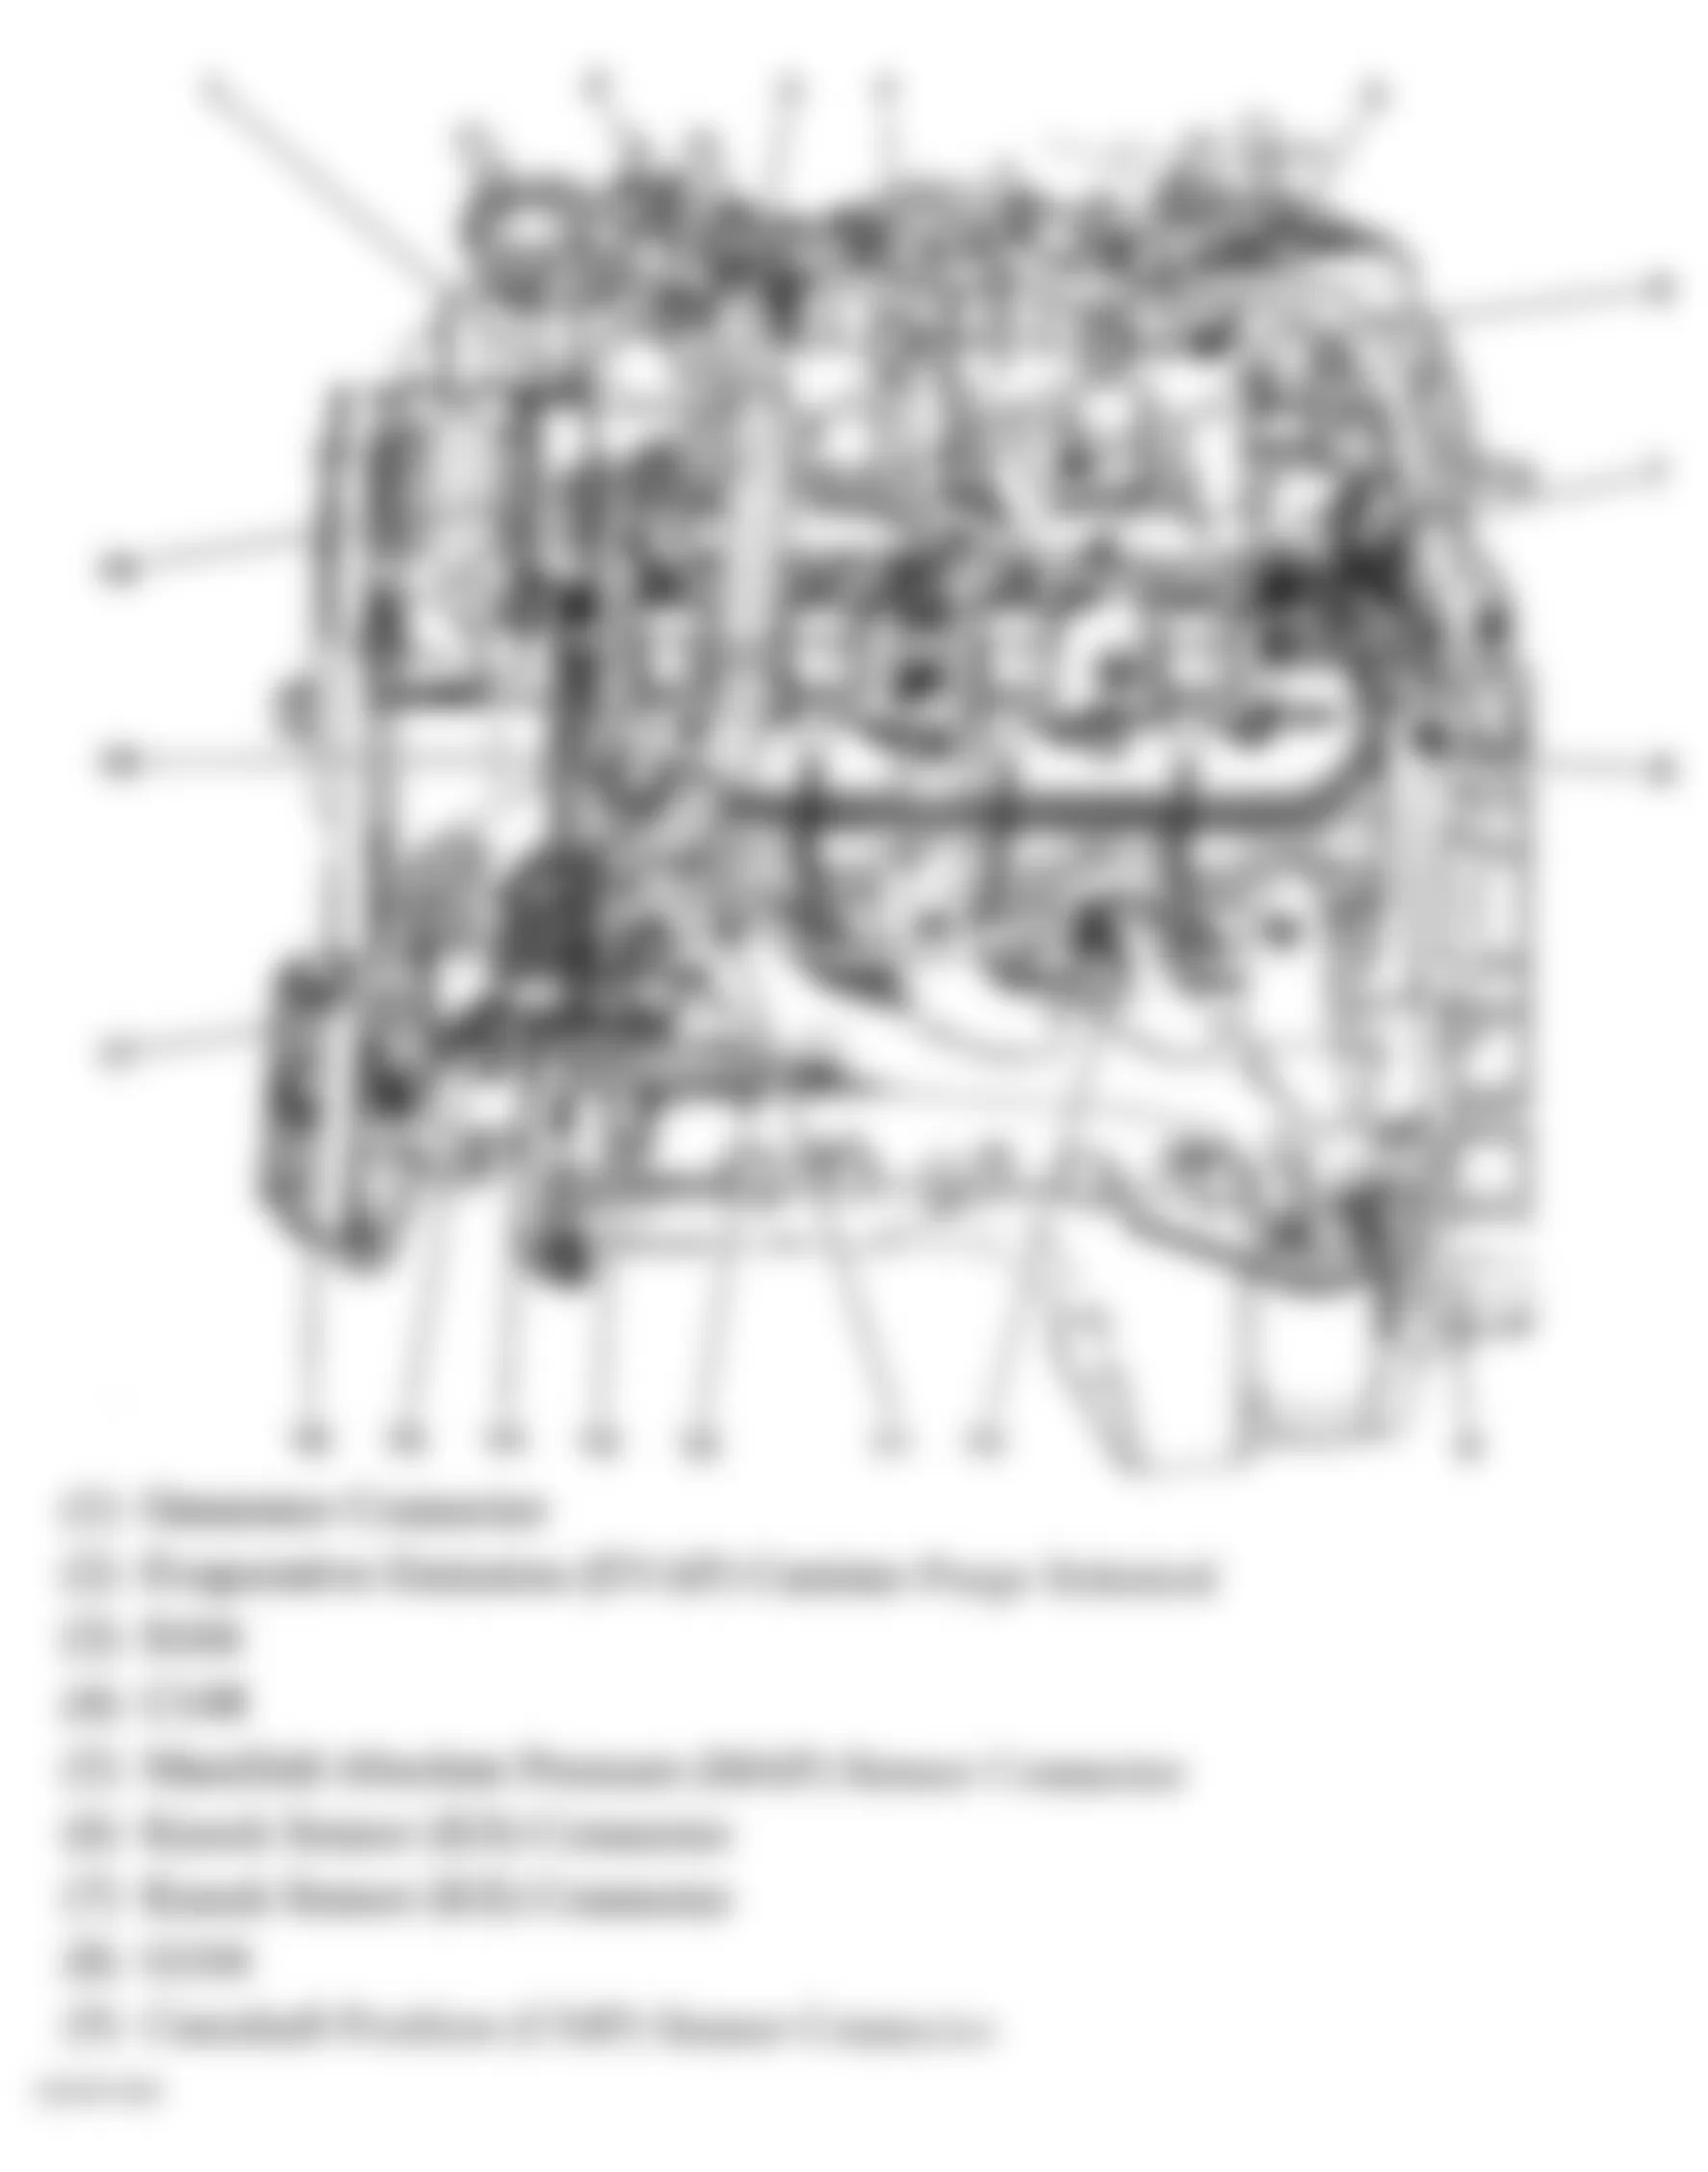 GMC Sierra 1500 2005 - Component Locations -  Left Side Of Engine (4.8L, 5.3L & 6.0L)